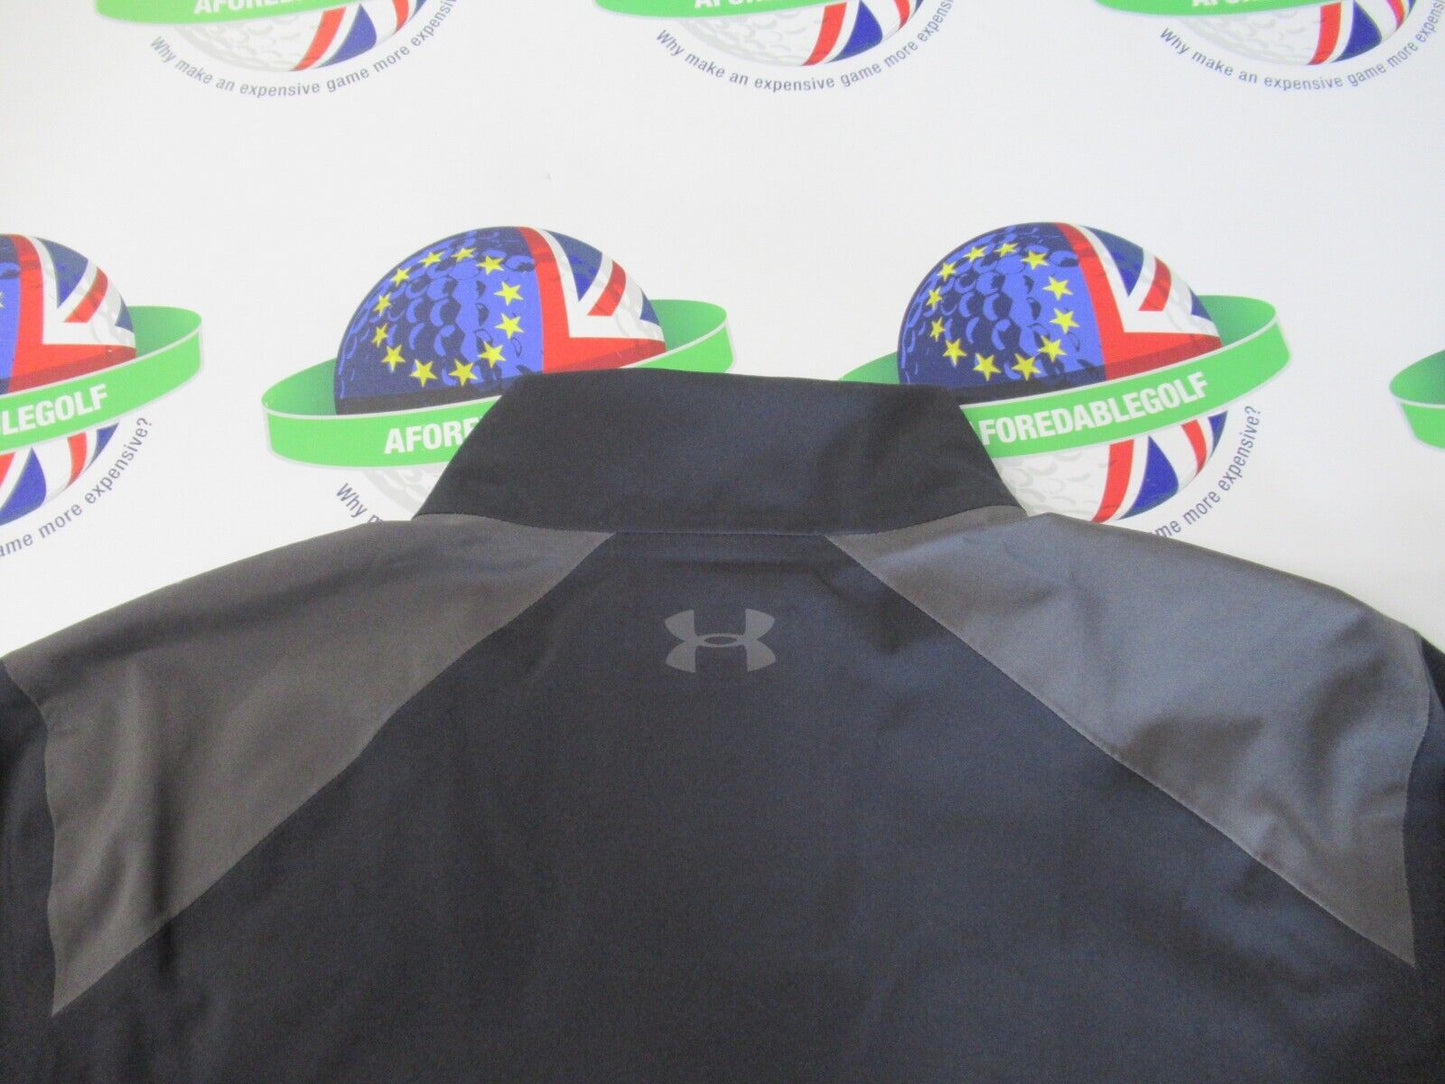 under armour portrush waterproof jacket grey/black/red uk size small loose